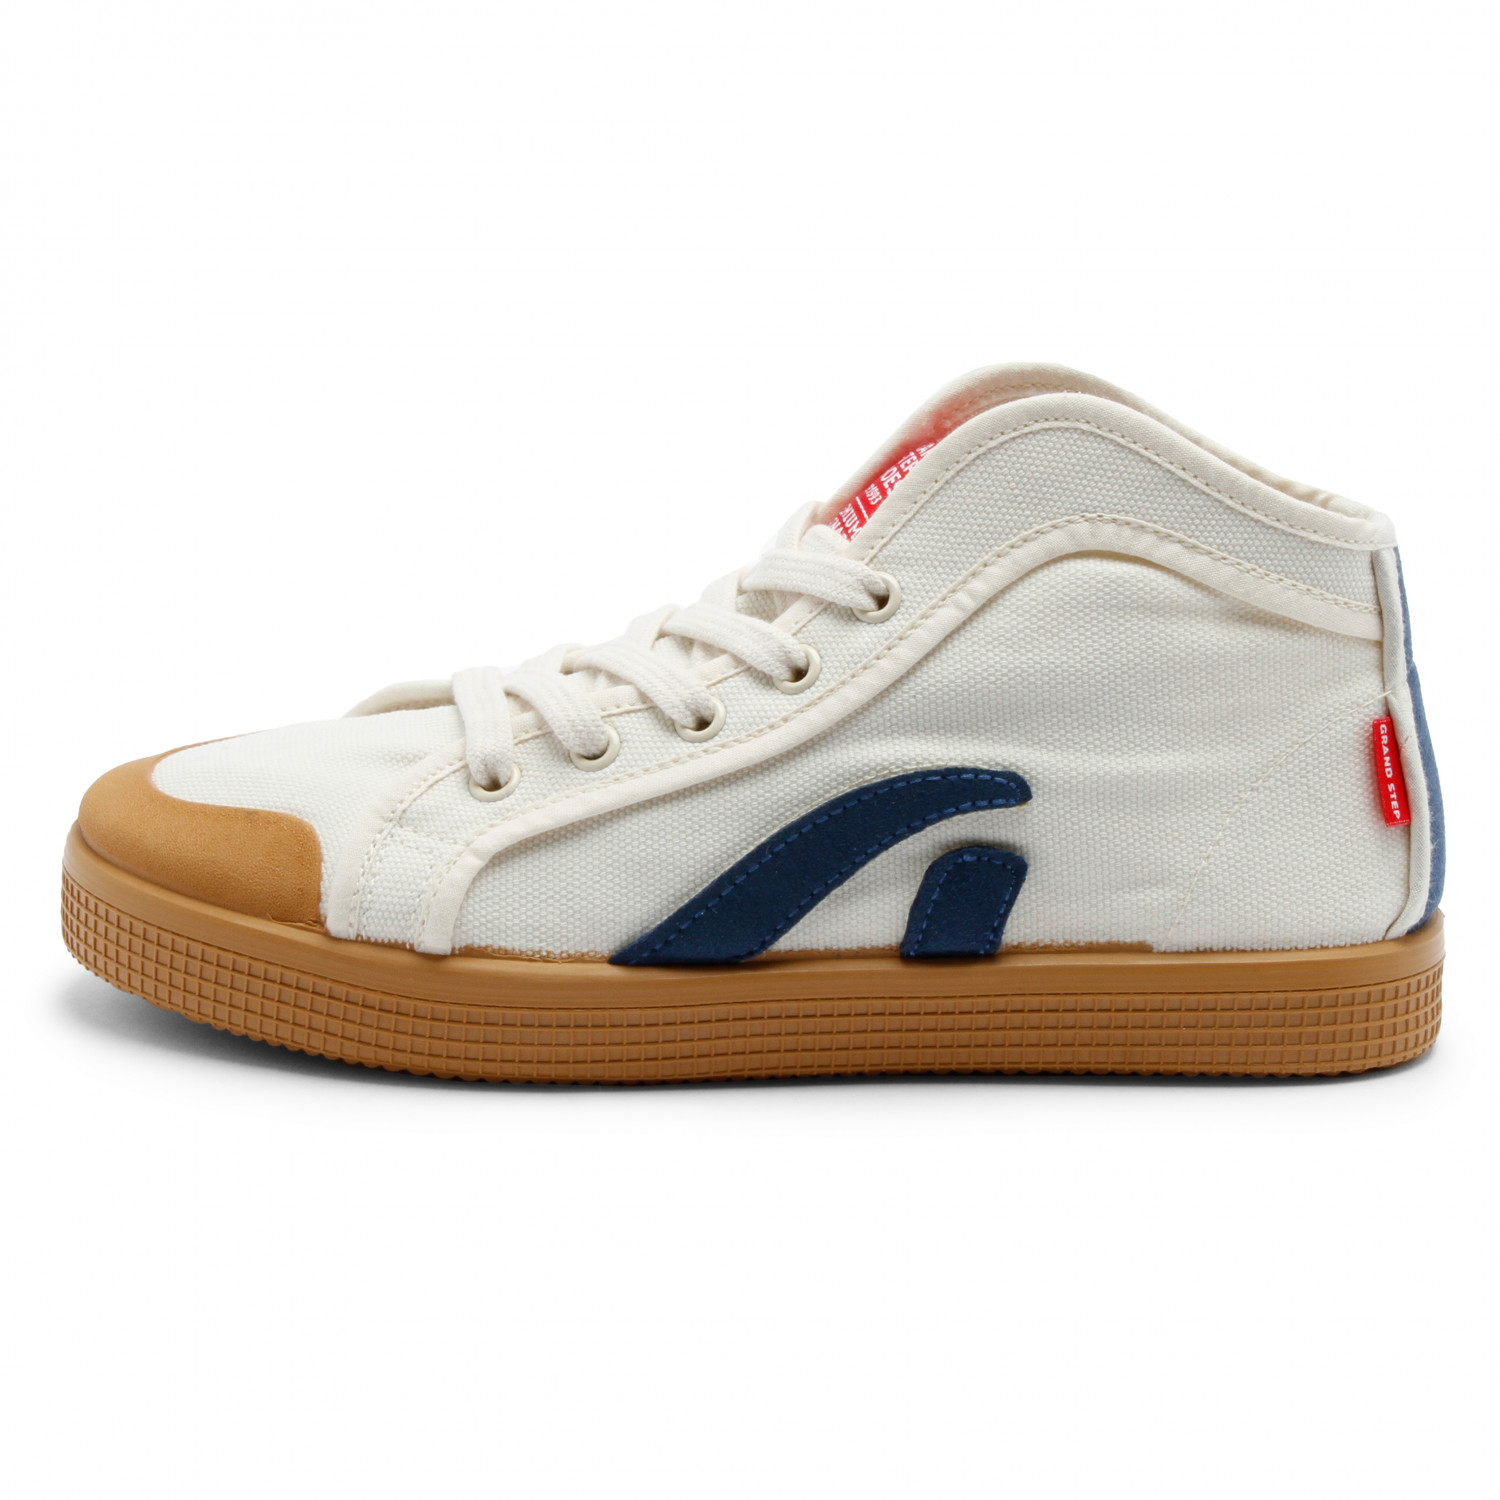 Кроссовки Grand Step Shoes Taylor, цвет Offwhite/Navy кроссовки genesis soley sporty 2 0 unisex offwhite